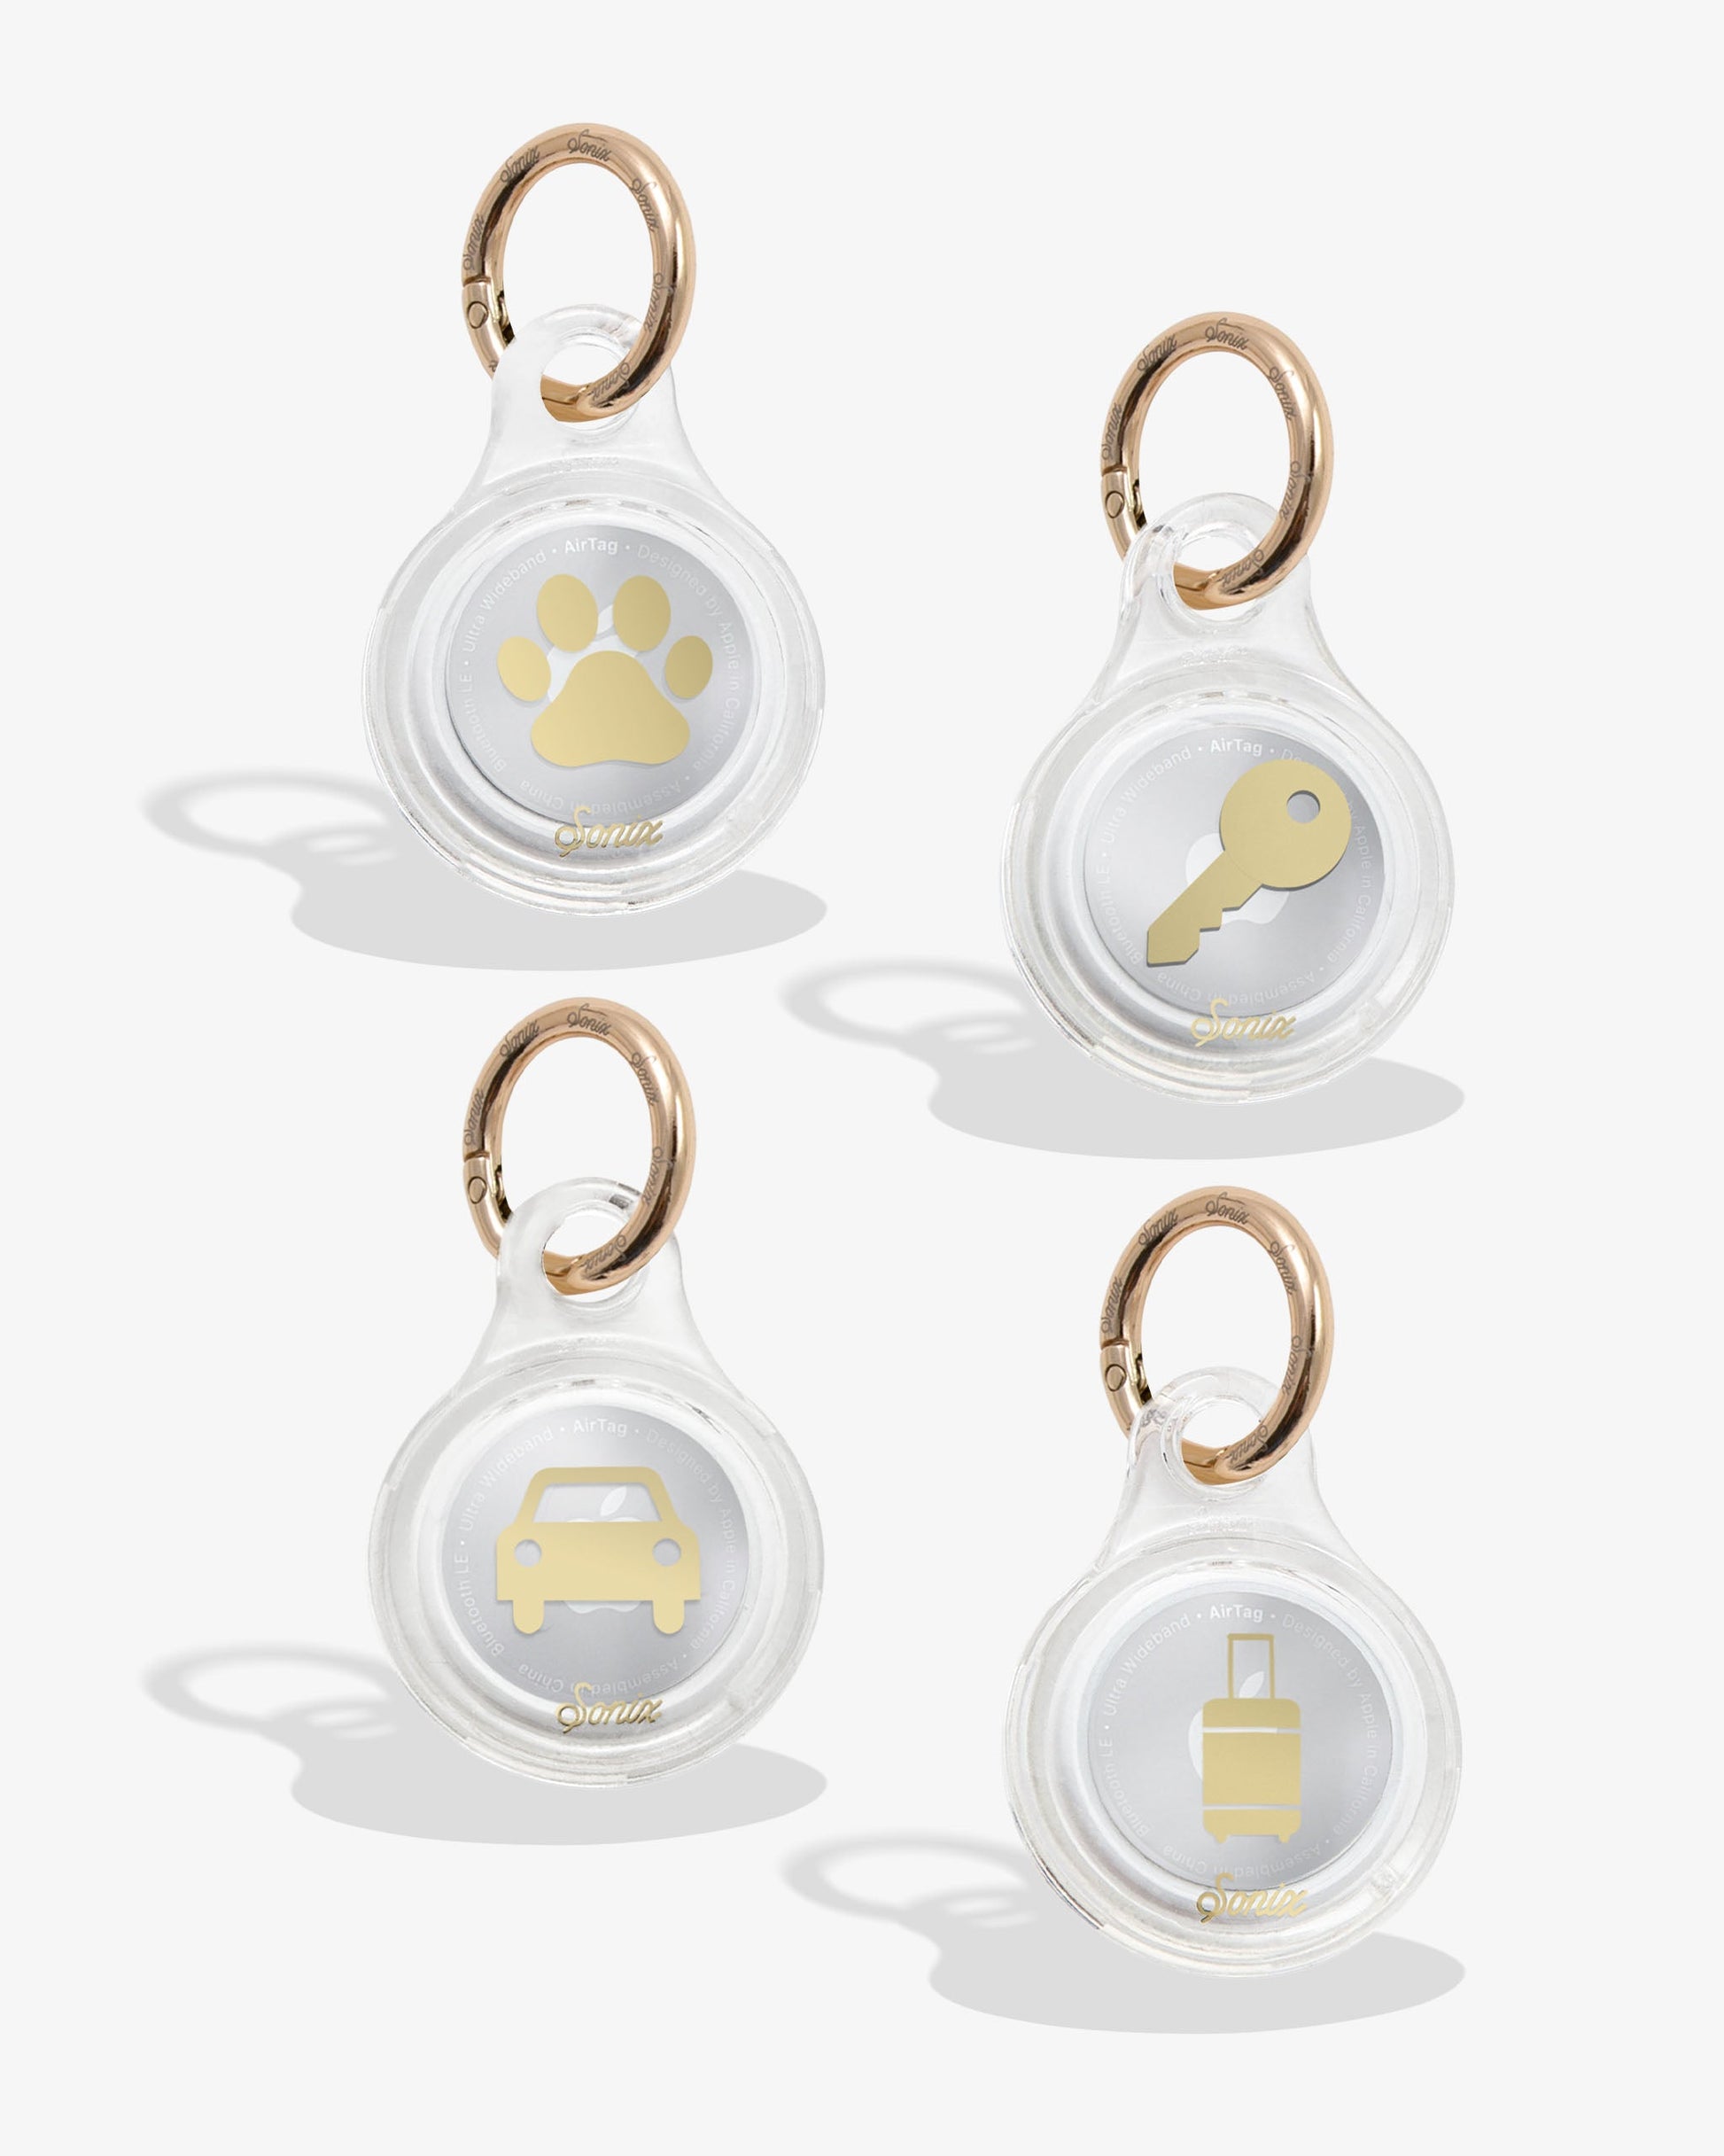 clear air tag cover with gold foil paw print, clear air tag cover with gold foil key, clear air tag cover with gold foil car, clear air tag cover with gold foil luggage